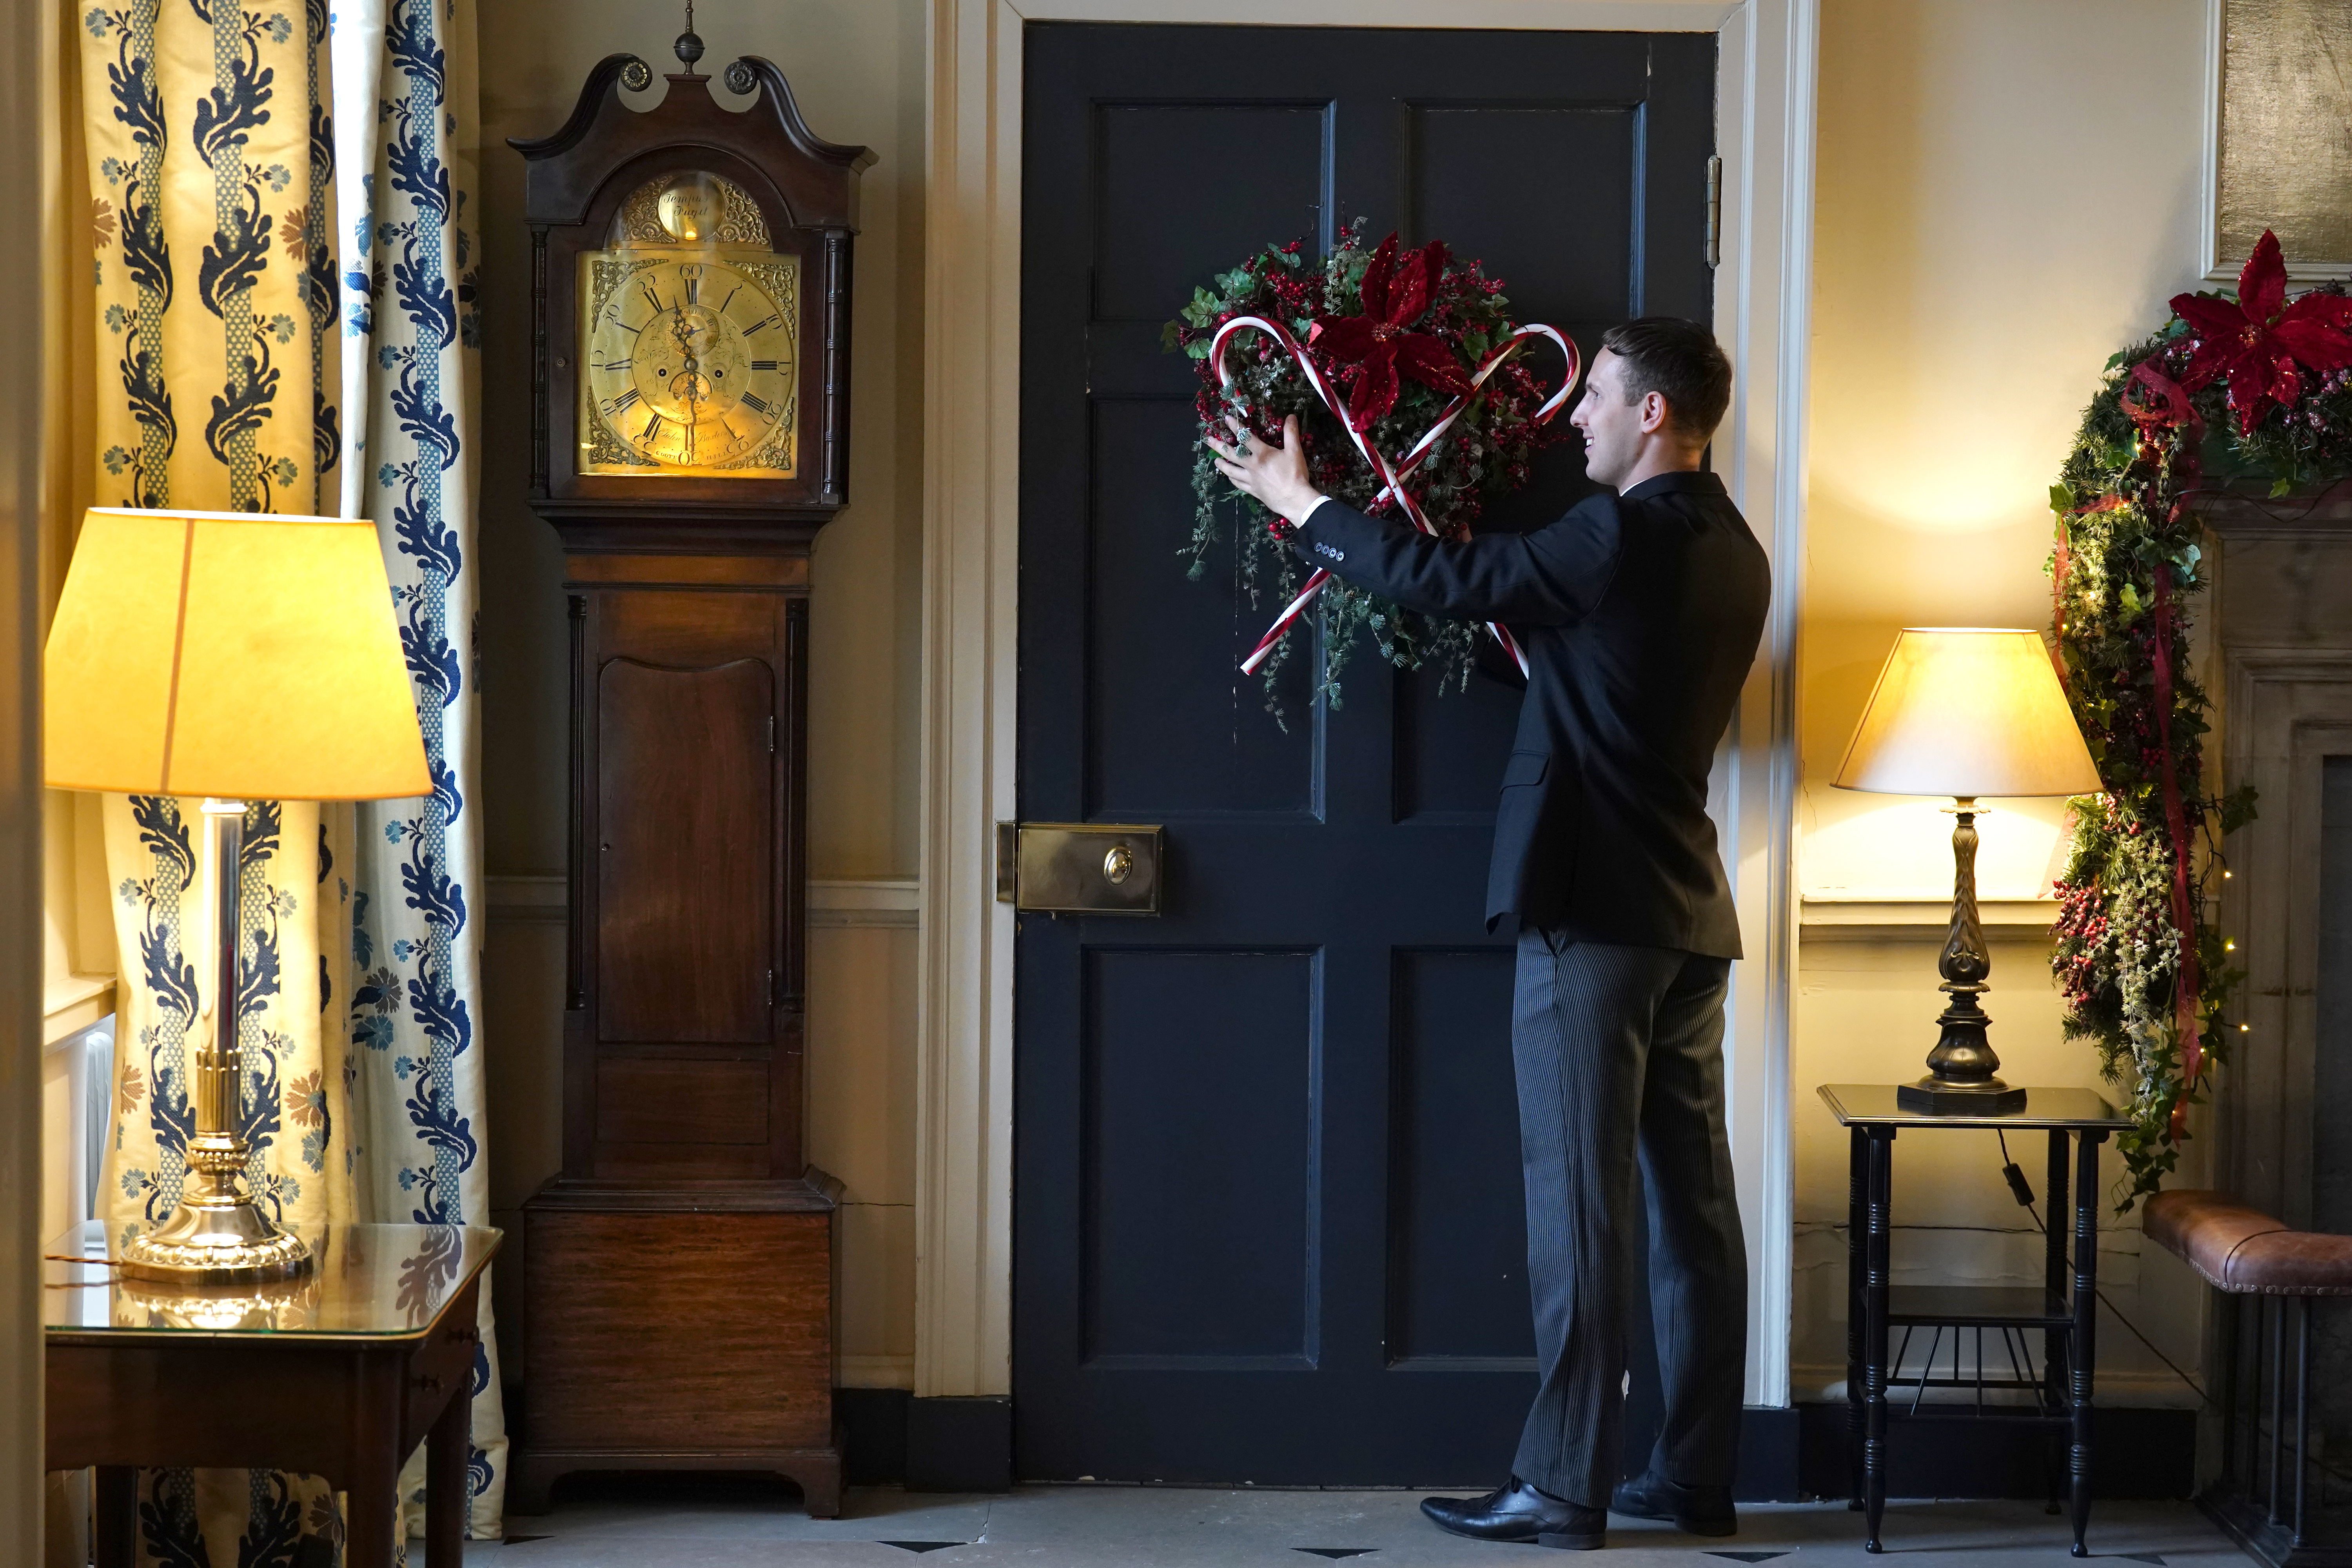 Michael Russell checks the candy cane decorations on the door